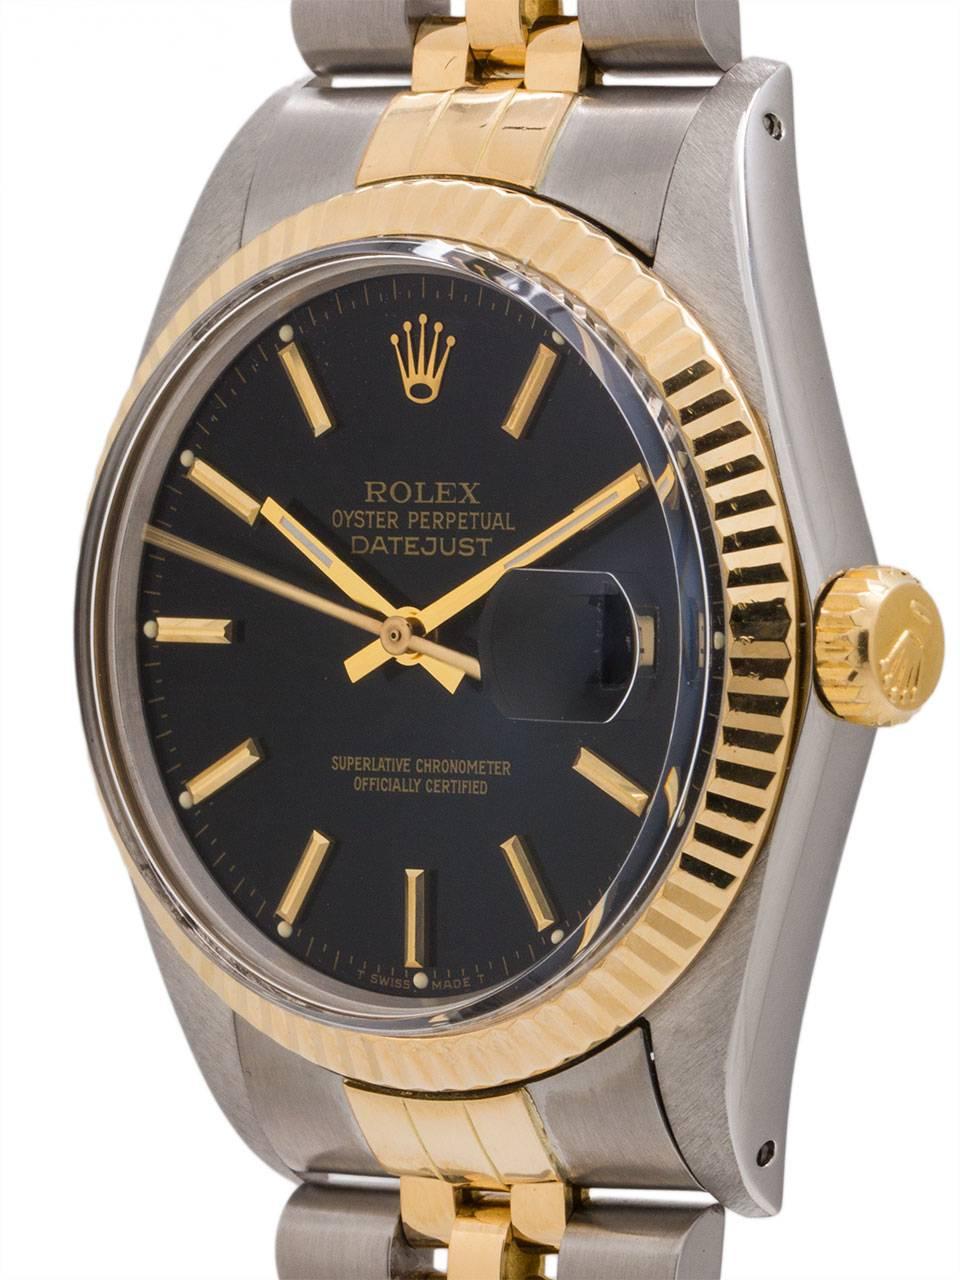 
An exceptionally well preserved example Rolex Datejust ref 16013 SS/18K YG circa 1986 with original black dial complete with box and papers. Featuring full size man’s 36mm diameter case with 18K YG fluted bezel, and acrylic crystal. Powered by